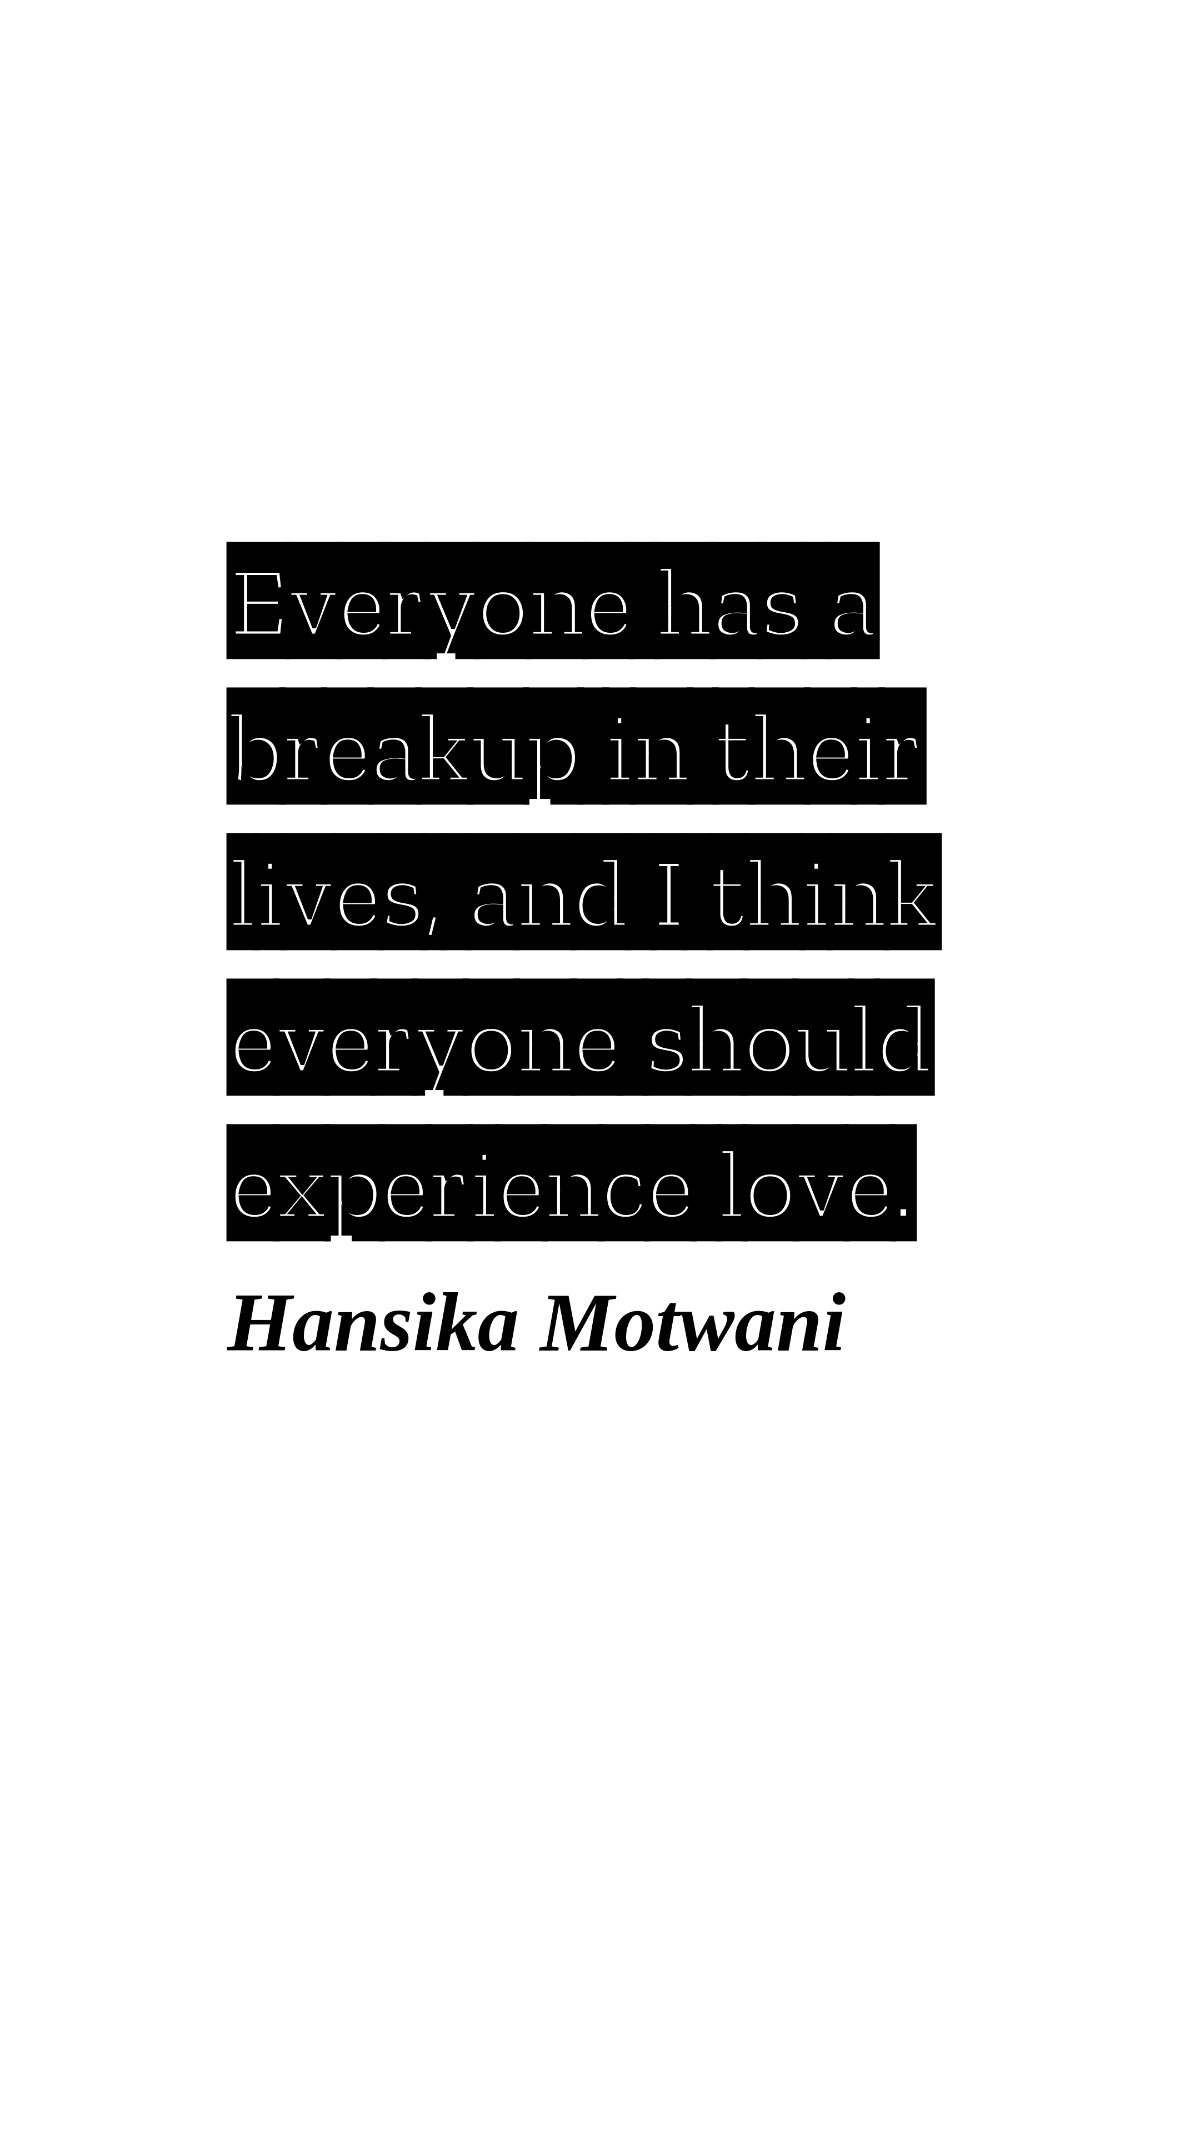 Hansika Motwani - Everyone has a breakup in their lives, and I think everyone should experience love. Template